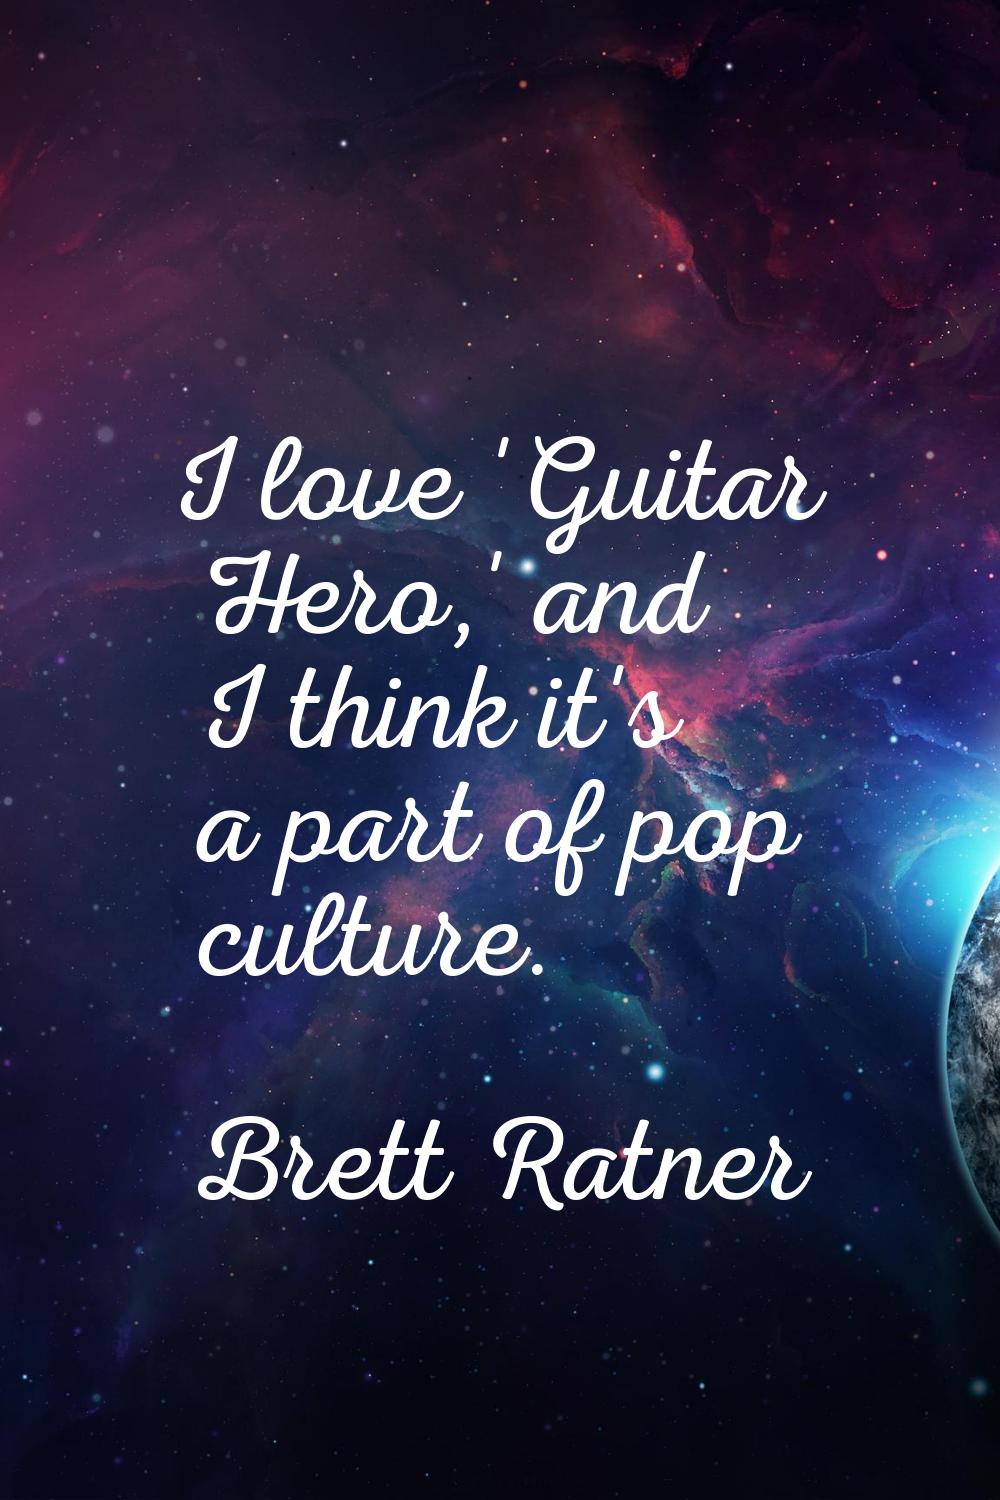 I love 'Guitar Hero,' and I think it's a part of pop culture.